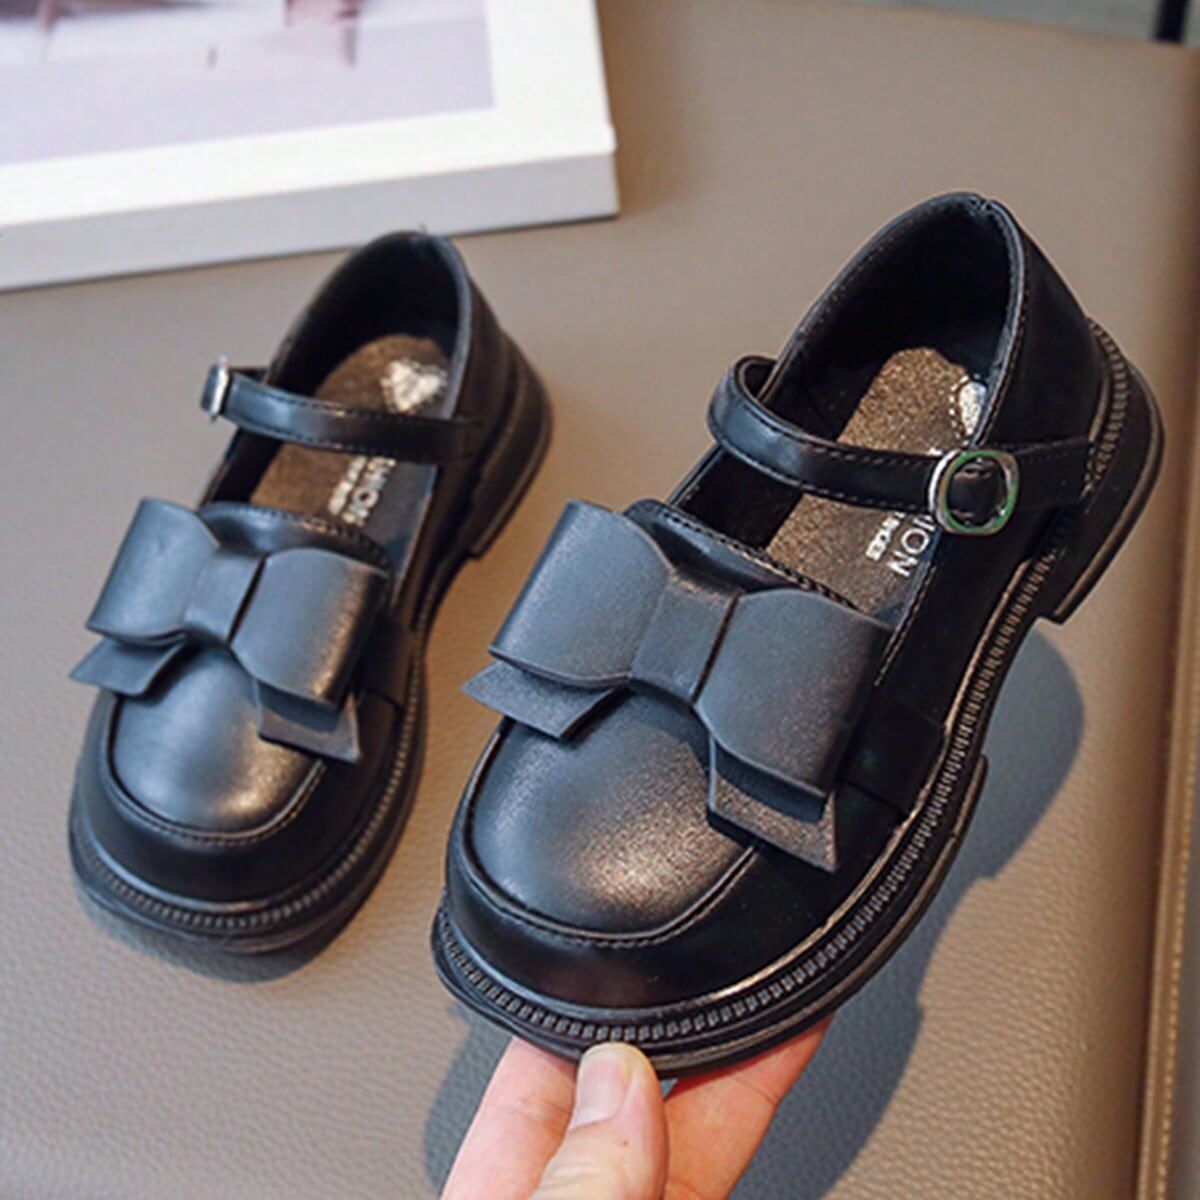 SHEIN Children's simple and comfortable girls' flat shoes Black EUR34,EUR35,EUR36,EUR26,EUR27,EUR28,EUR29,EUR30,EUR31,EUR32,EUR33